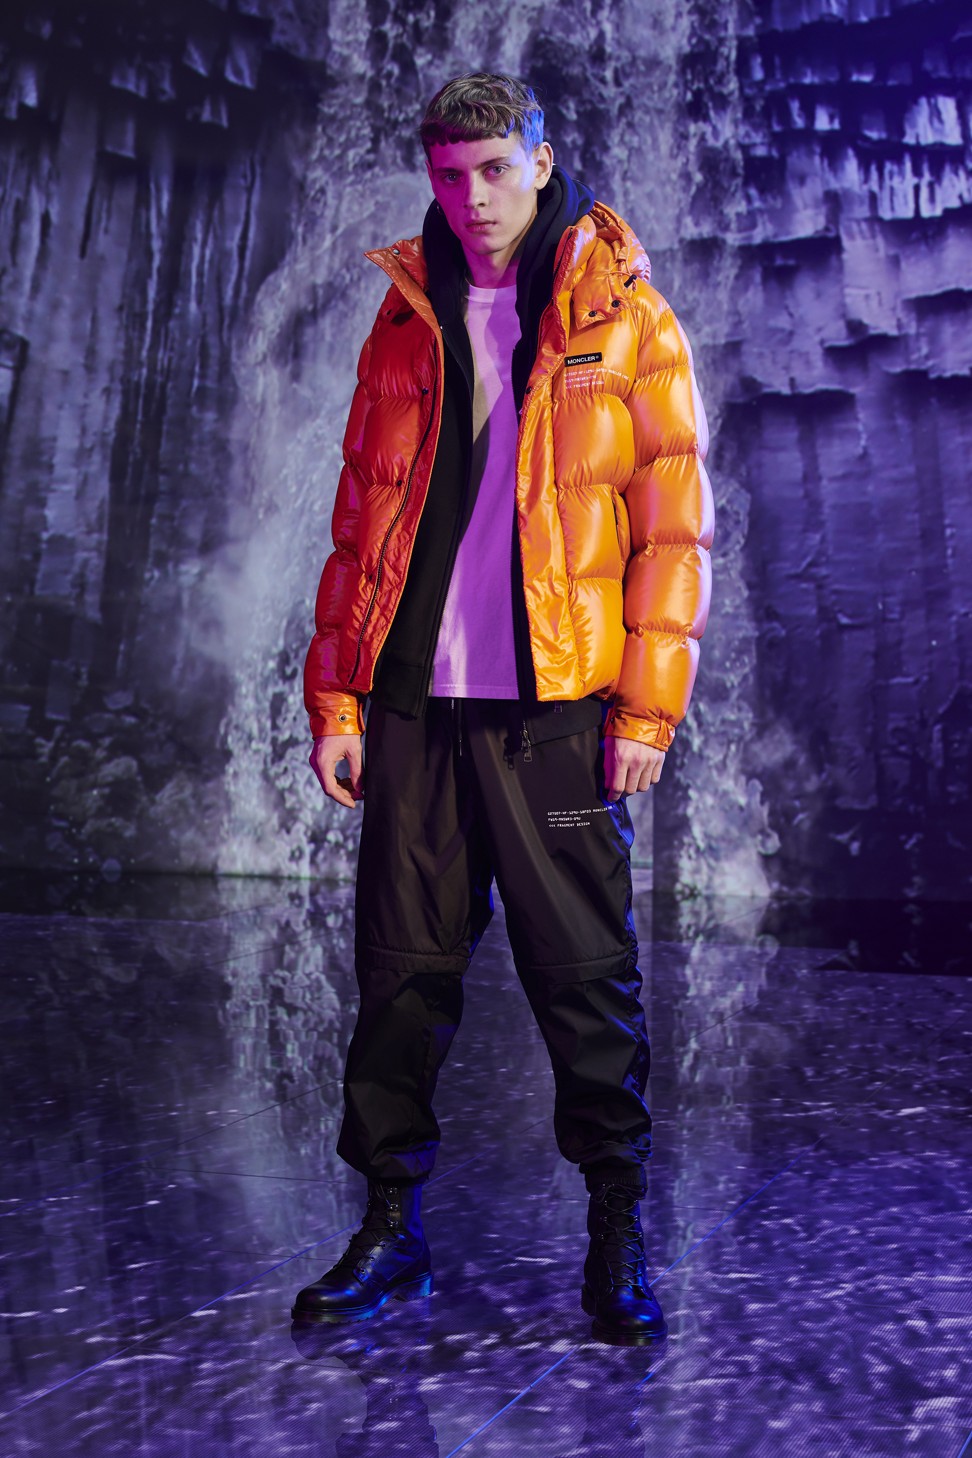 A look from Fujiwara’s collaboration with Moncler.